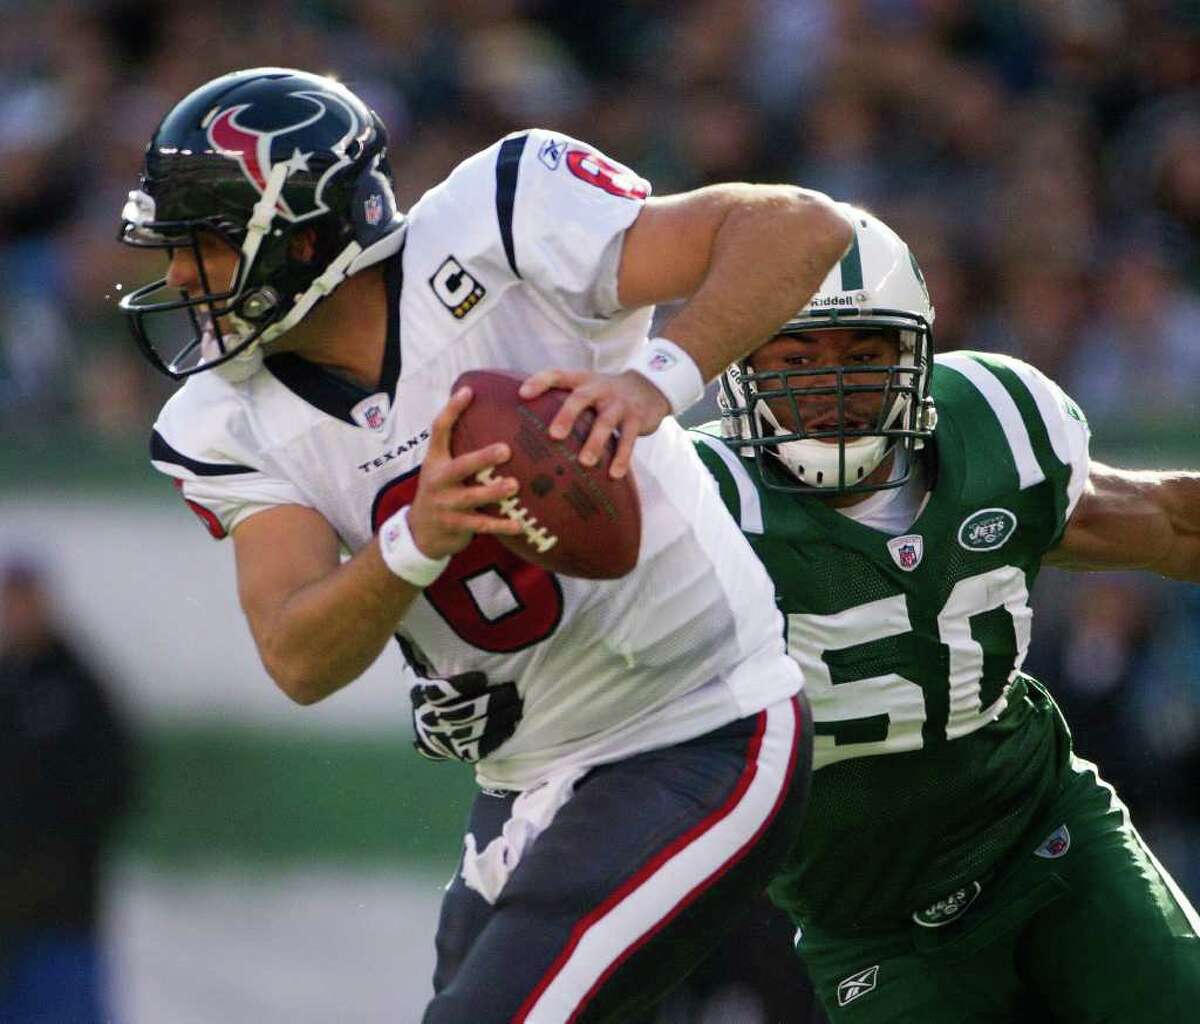 Defensive end Vernon Gholston (50) played three seasons with the Jets before being released in March. He signed with the Bears in July and was released in August.